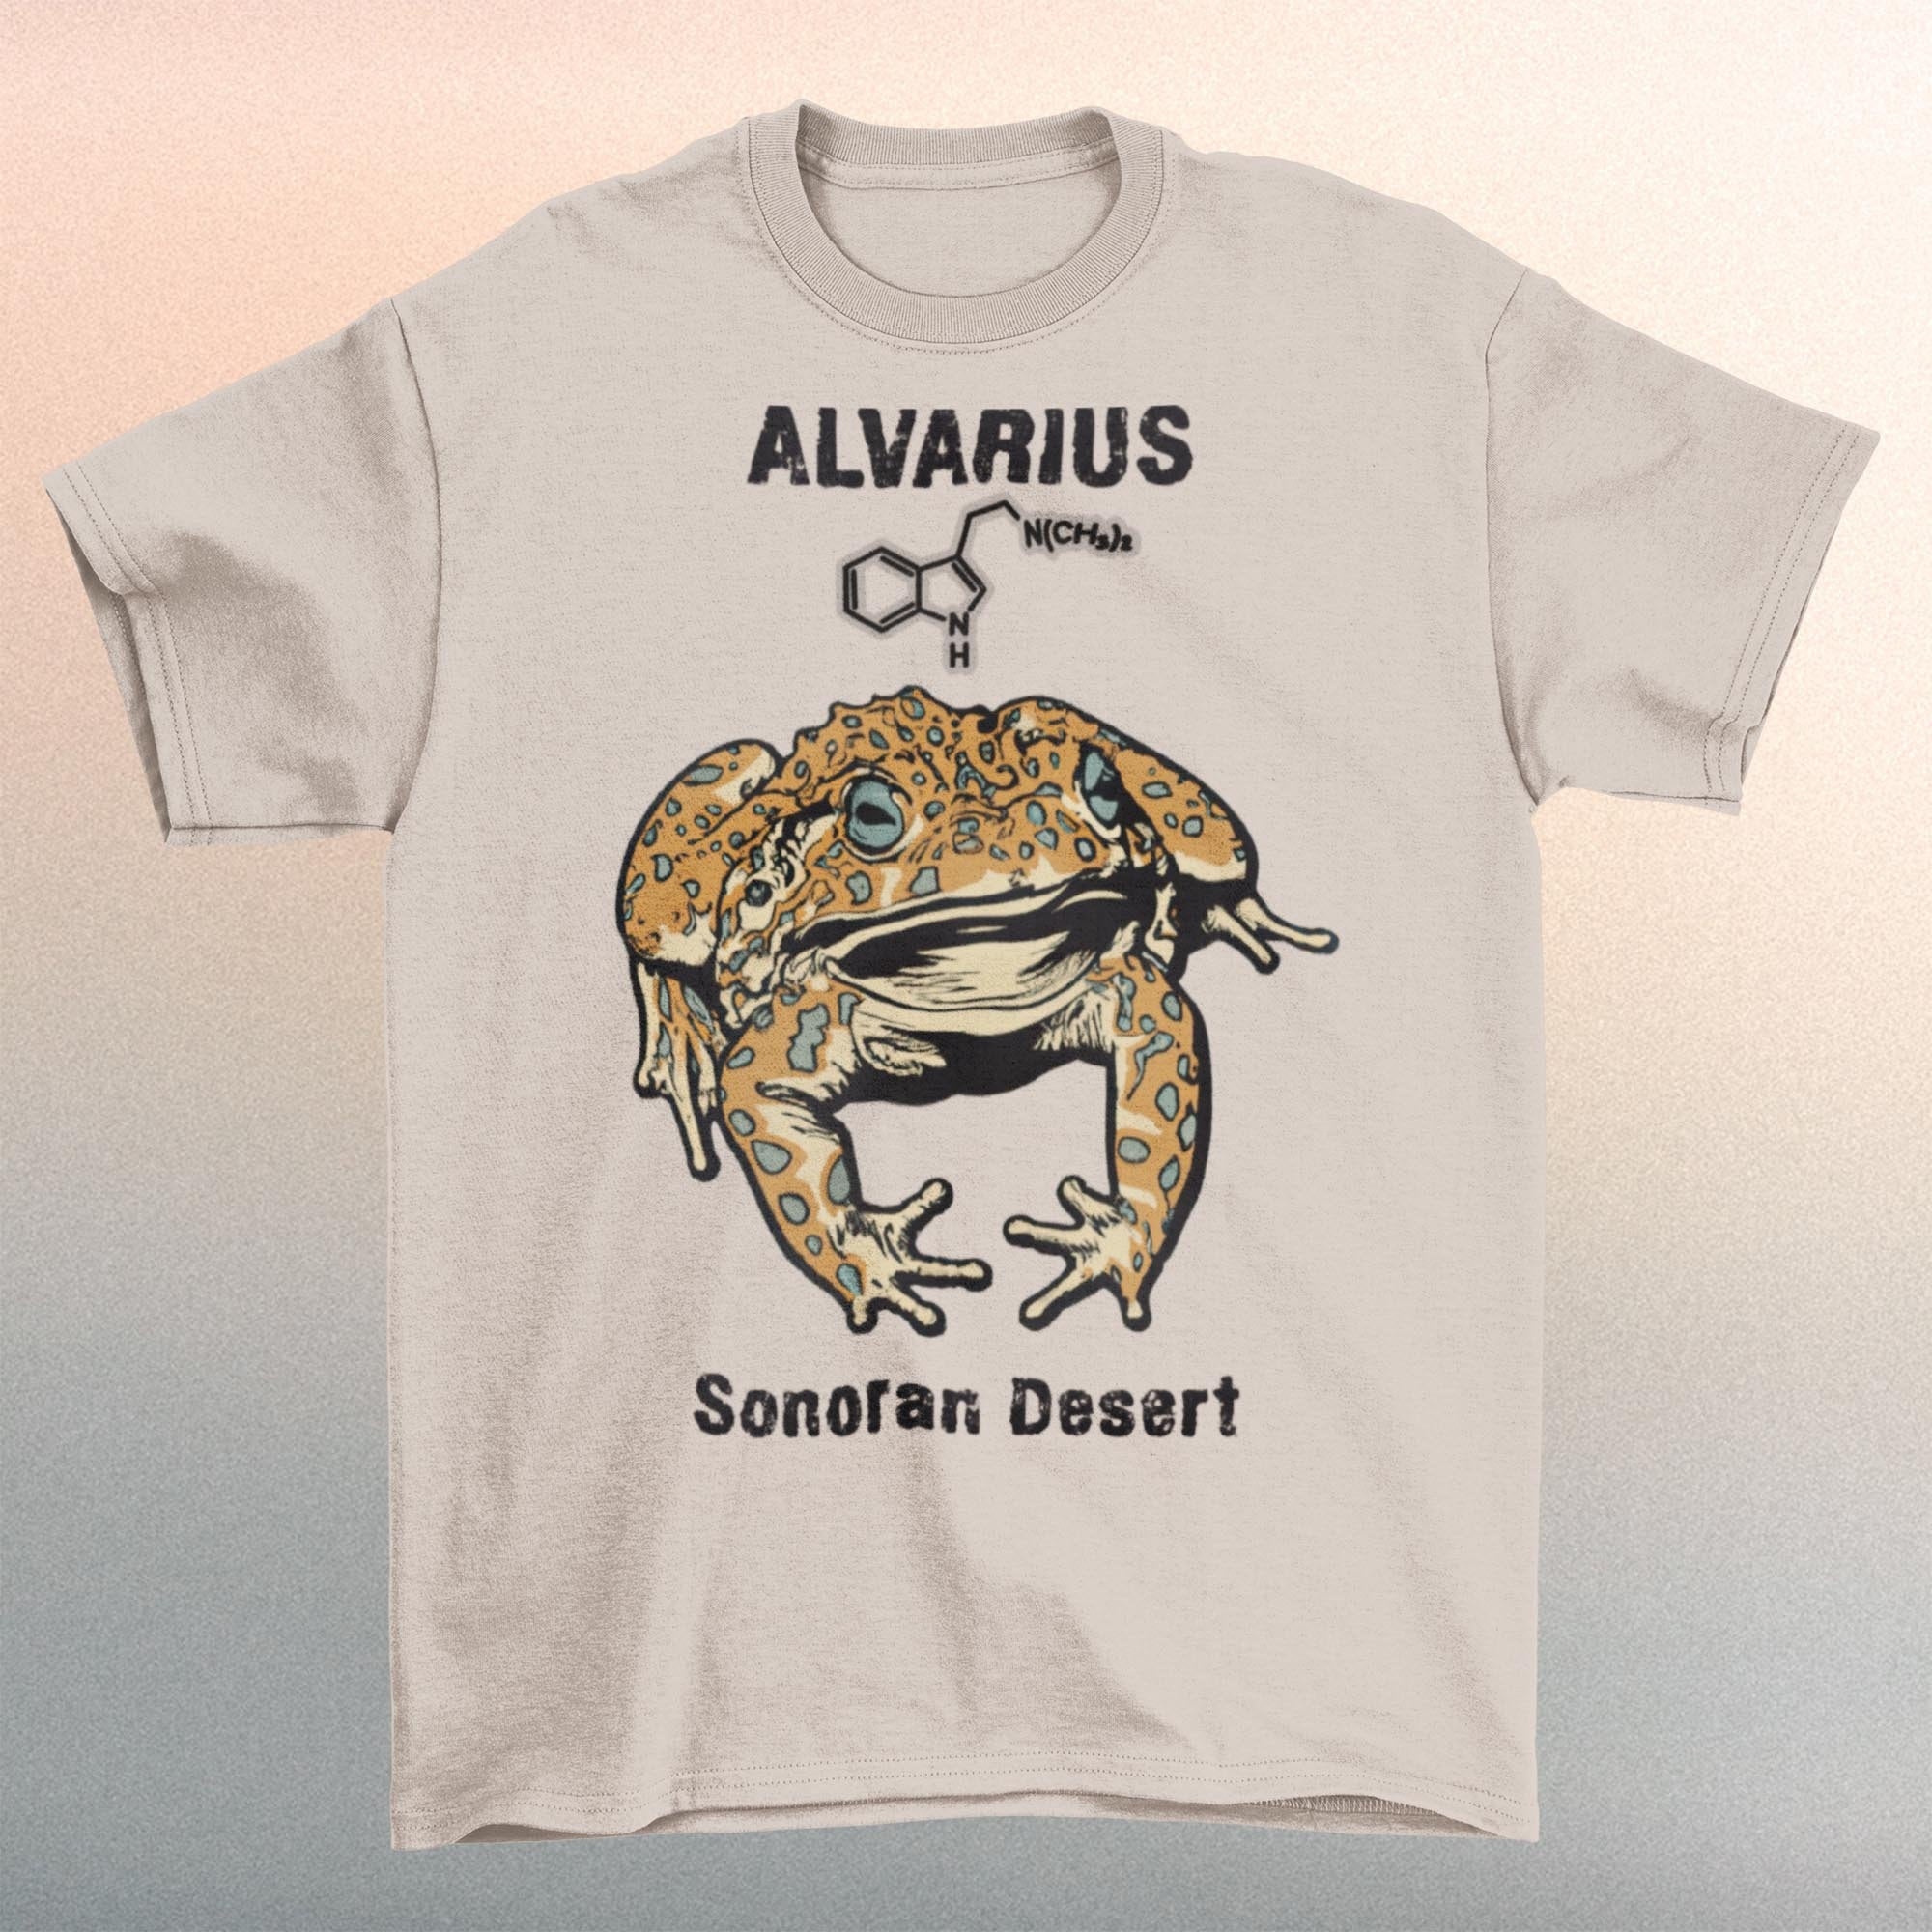 S / Sand Bufo Alvarius Toad, The Sonoran Desert 5-MeO DMT Psychedelic Frog, Trippy Ayahuasca Weed Chemistry | 420 Spiritual Digital Art T-Shirt Tee